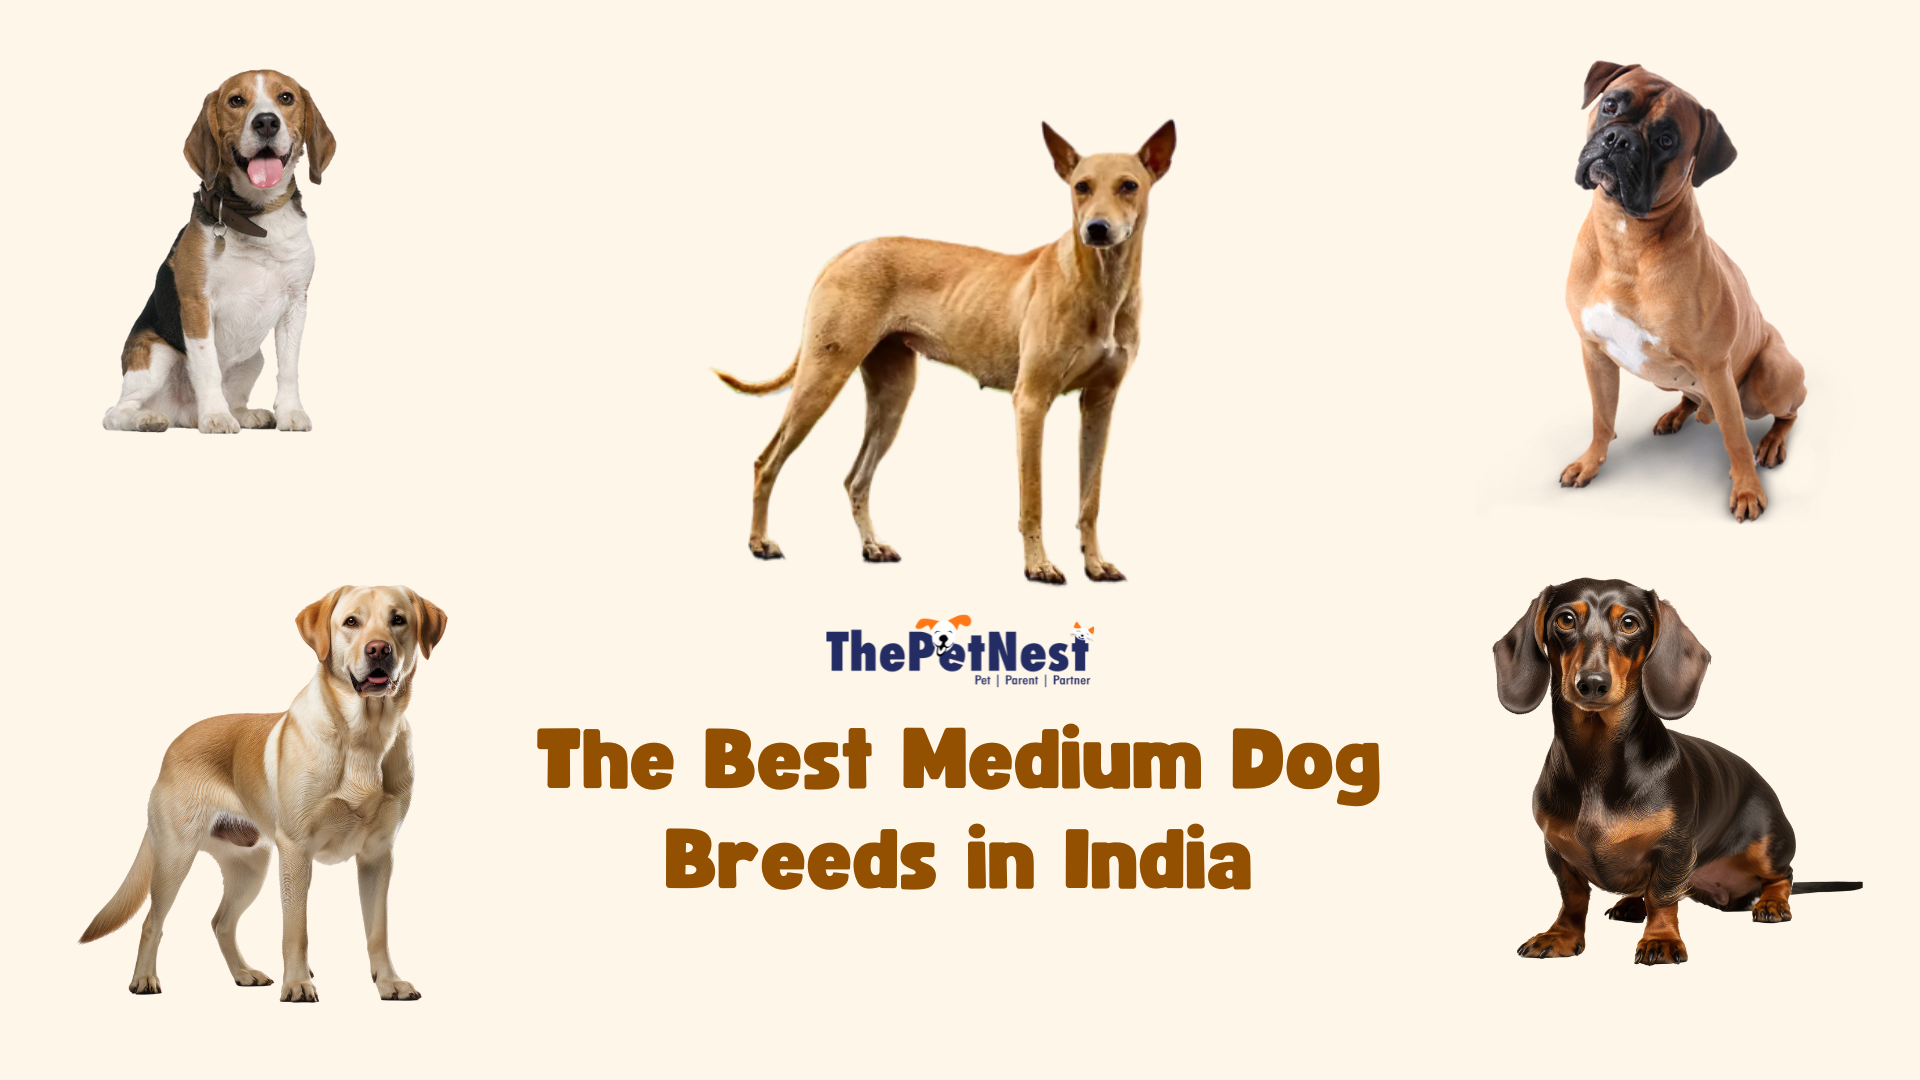 The Ultimate Guide to the Best Medium Dog Breeds in India